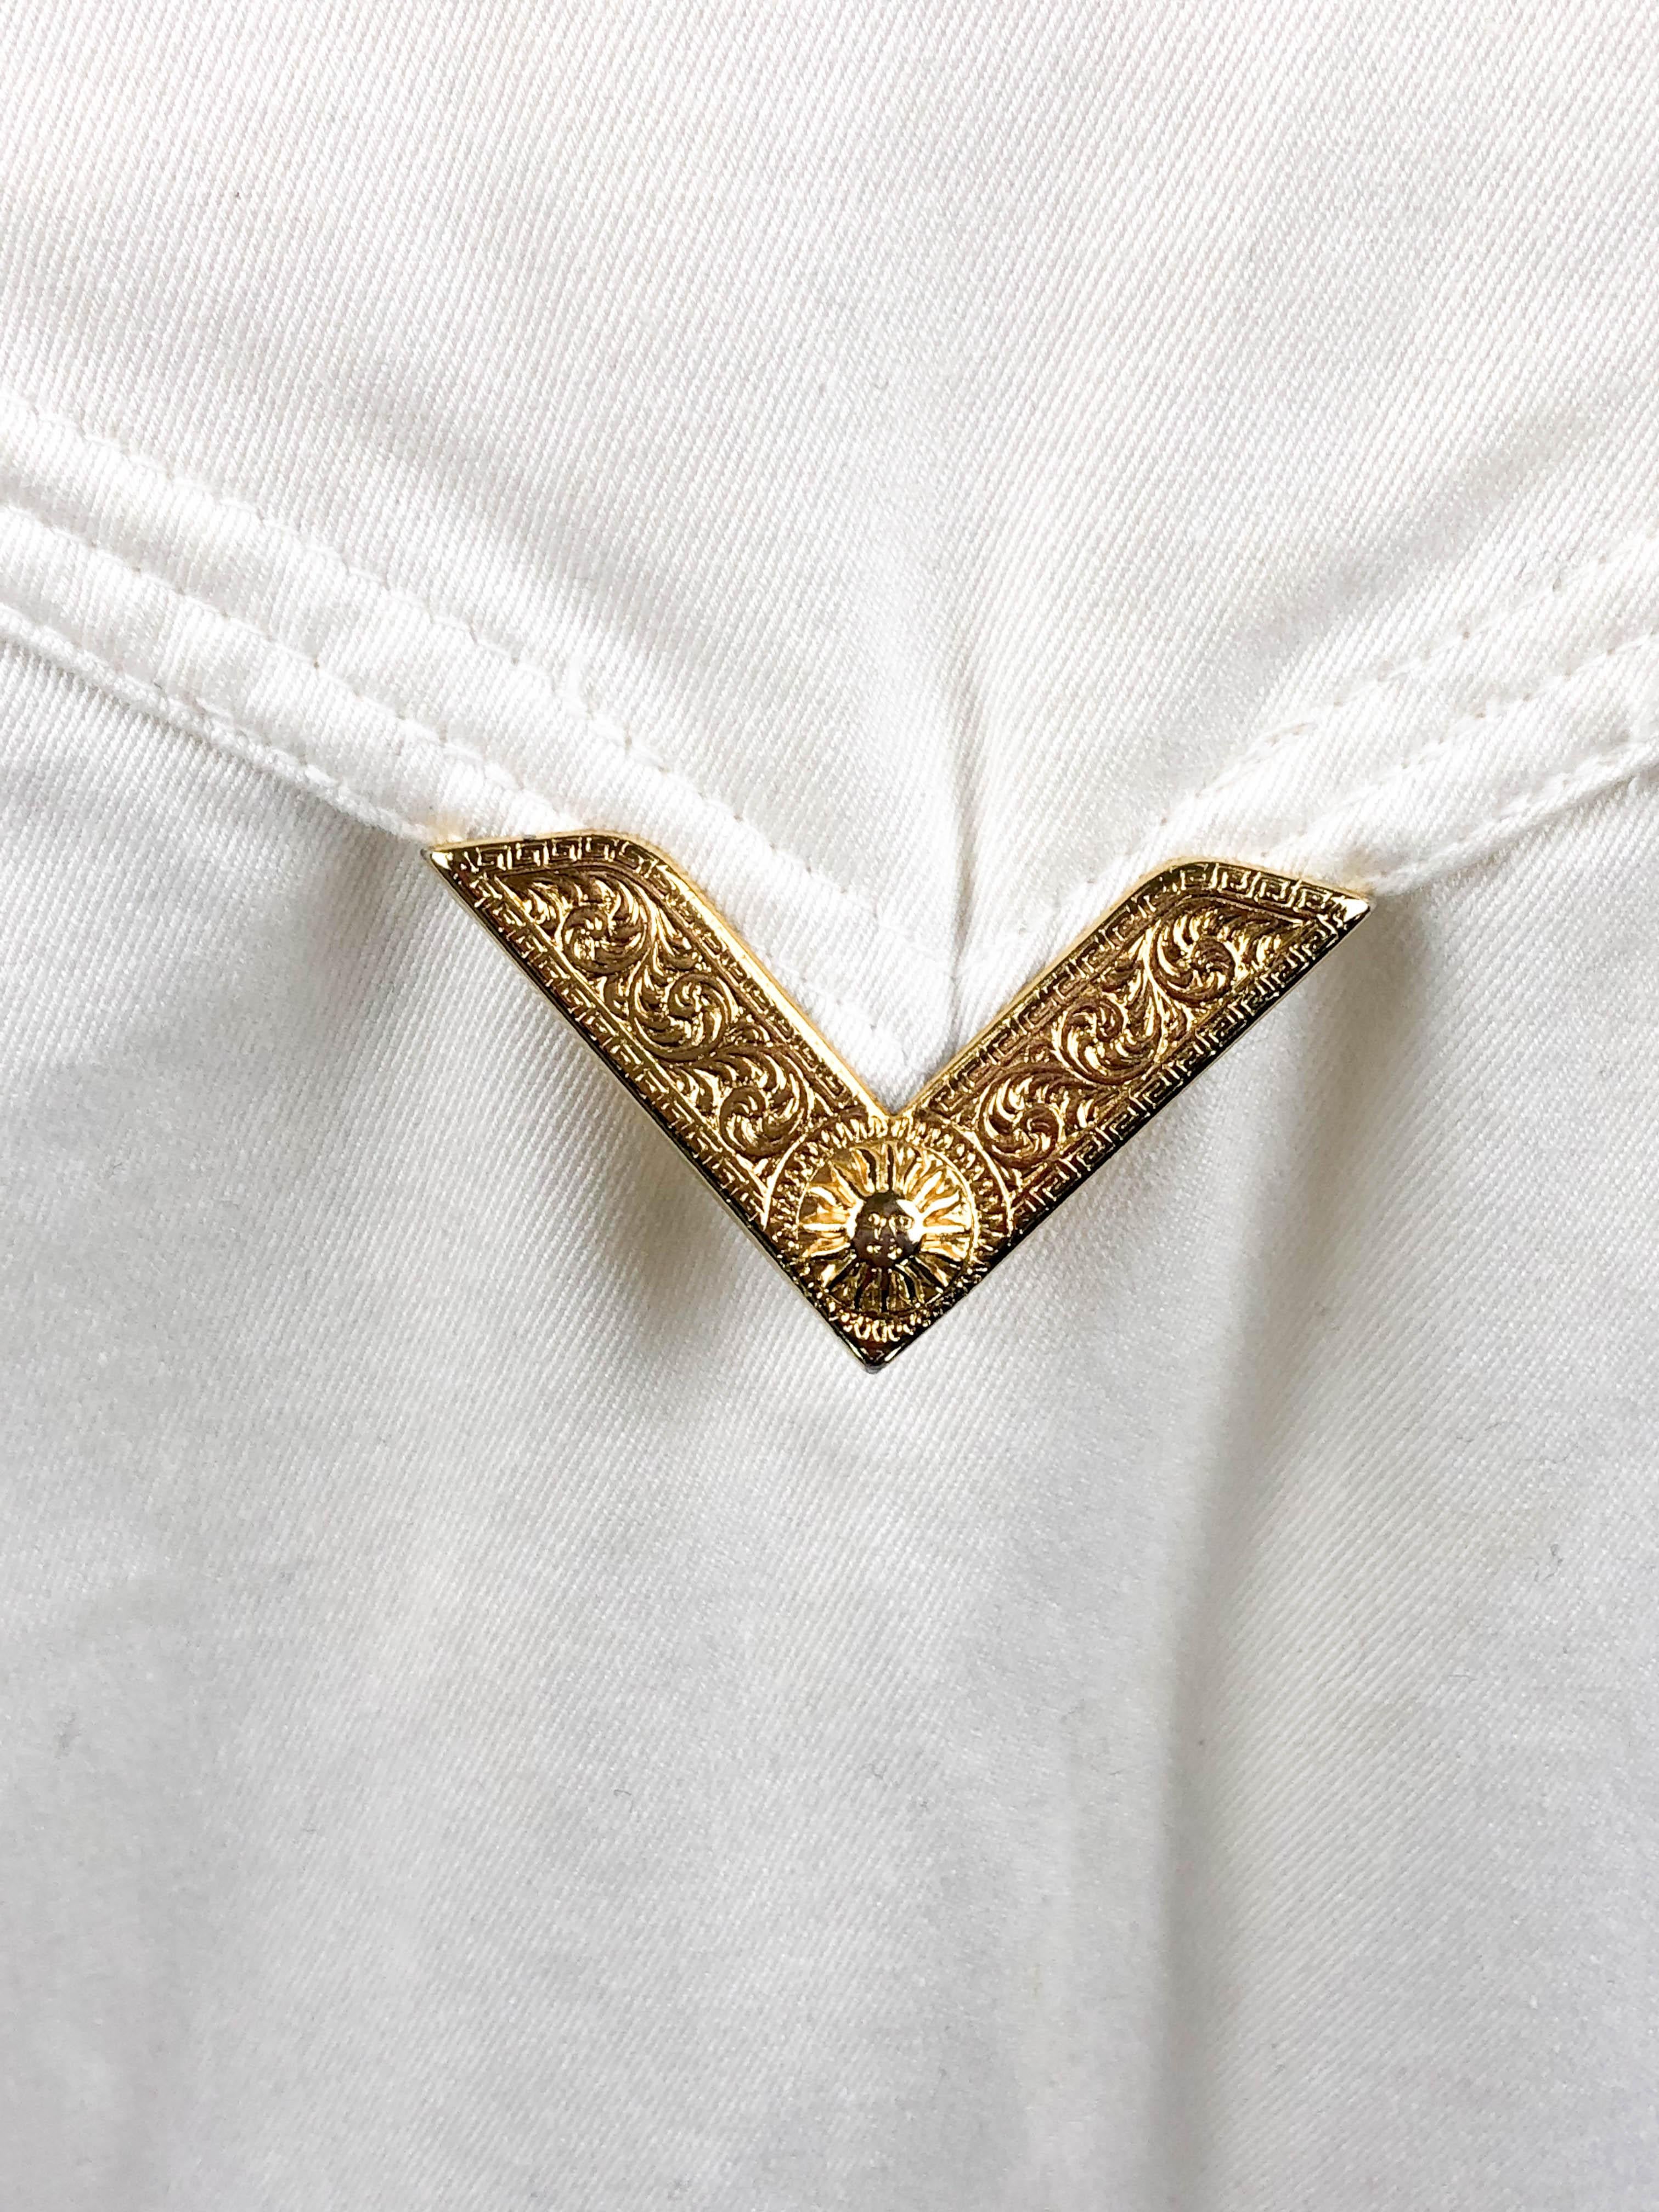 1991 Gianni Versace White Denim Waistcoat With Gilt Tips For Sale 8